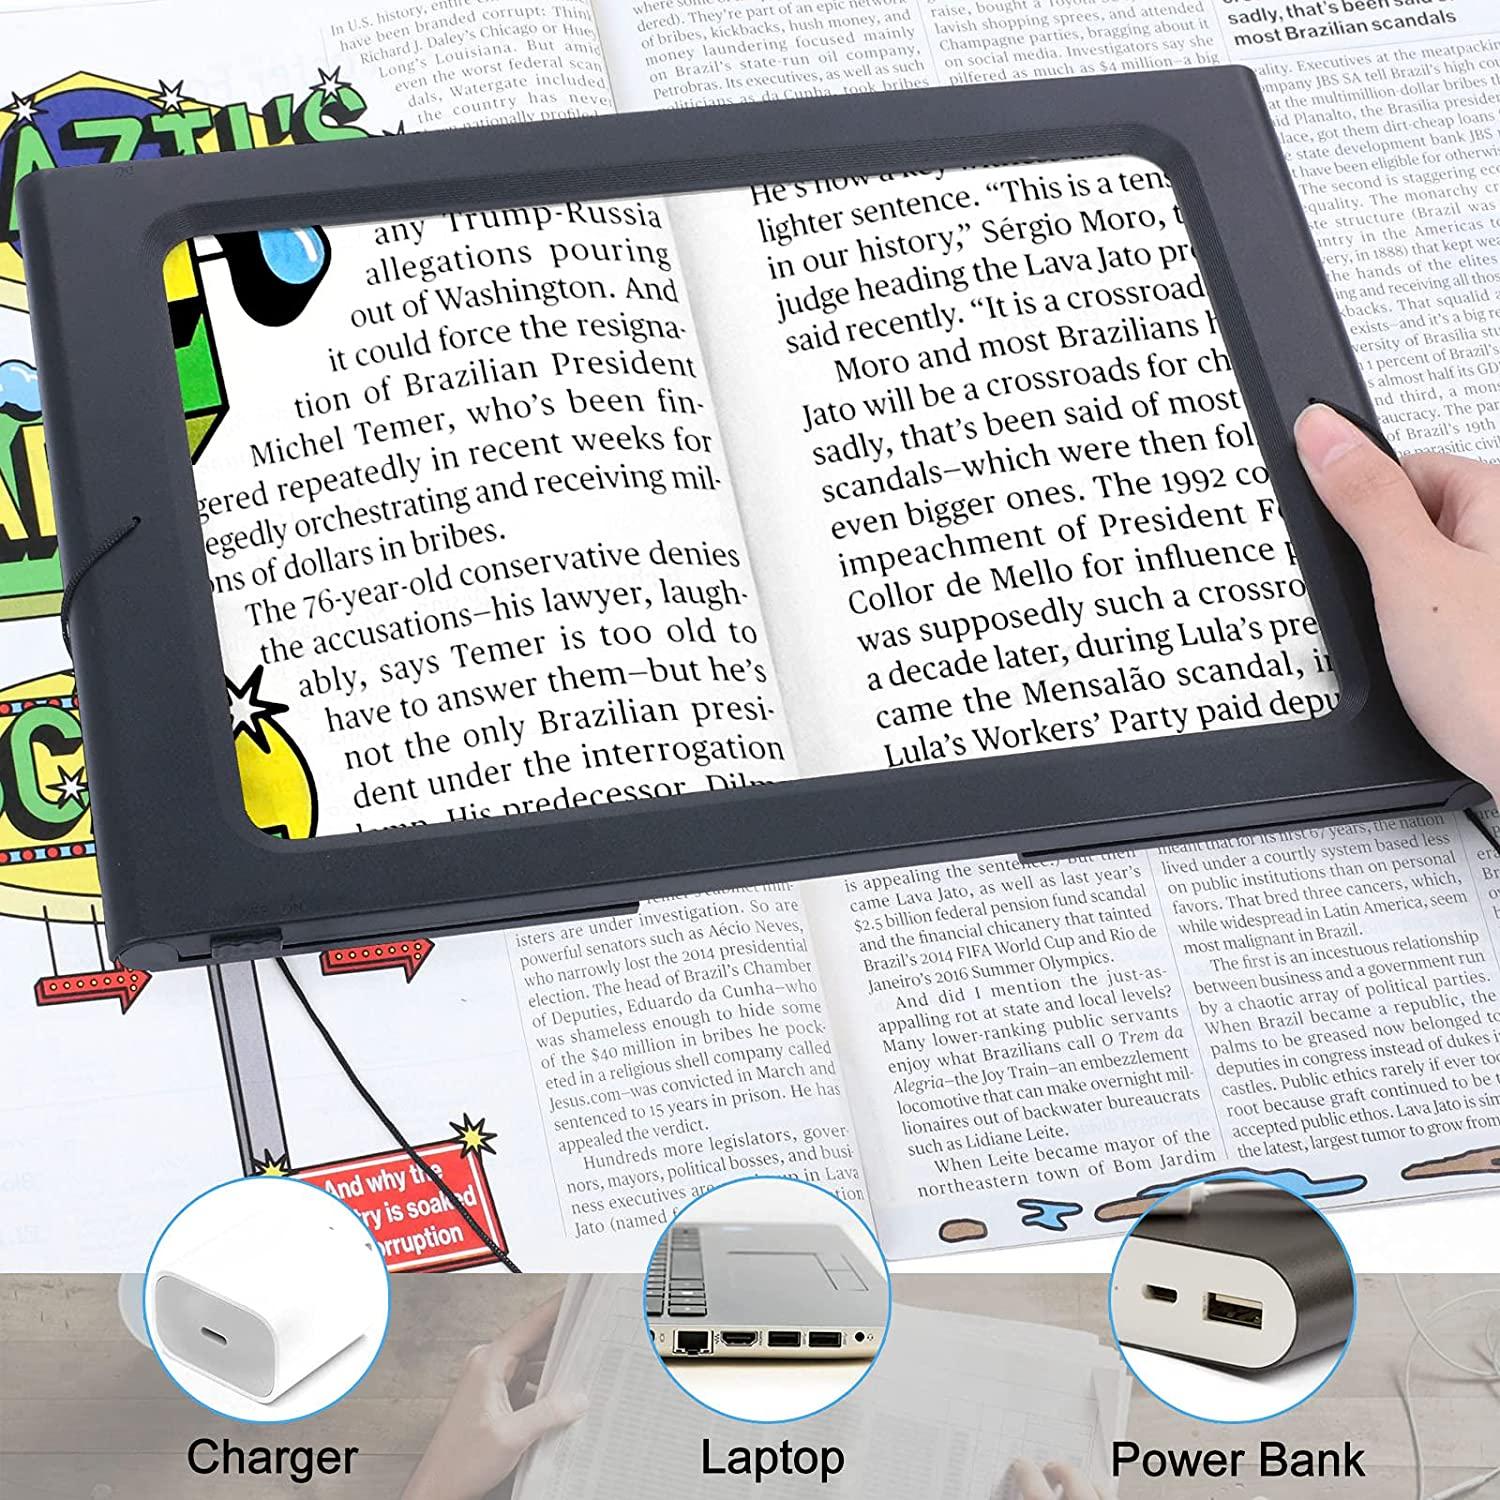 Glass Hands-Free Large Rectangular Desktop Reading Magnifying Glass with 4  LED 3X Magnifier A4 Full Page Magnifying - AliExpress